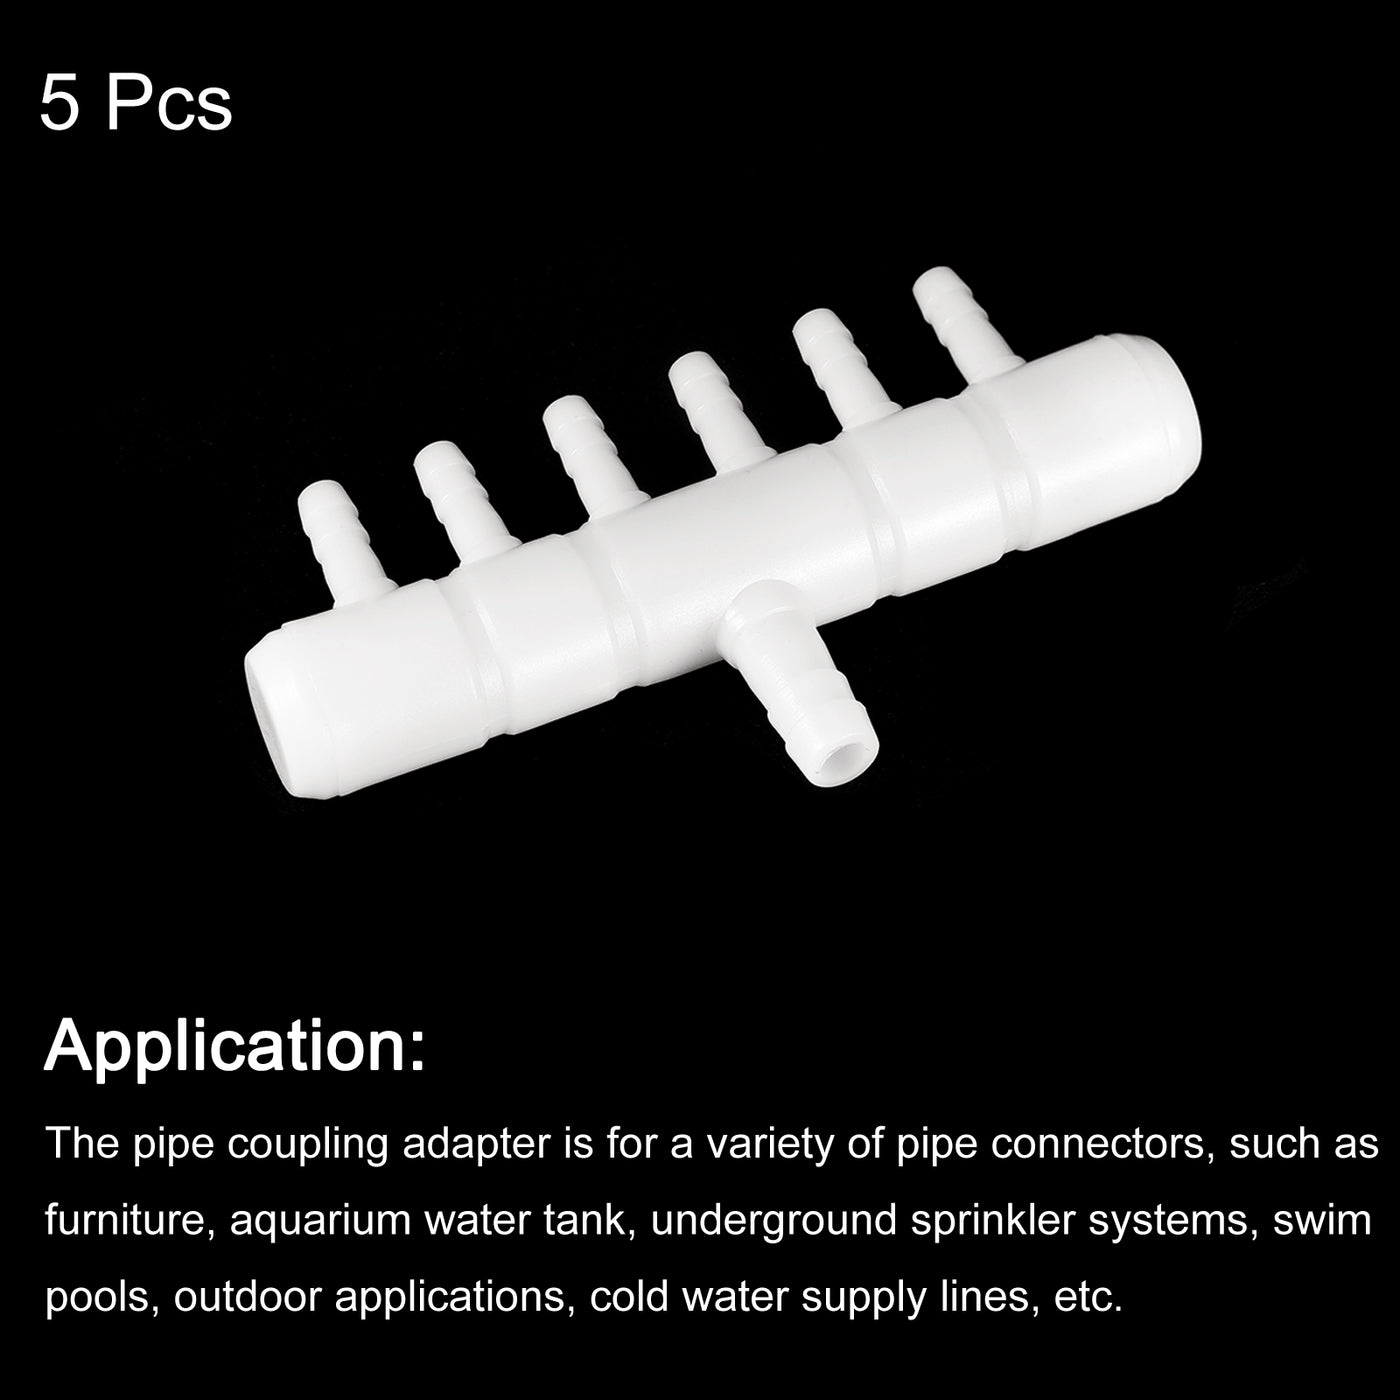 uxcell Uxcell Air Line Tubing Splitter Connector, 5Pcs 8mm/0.31" to 5mm/0.2" 6 Way, White